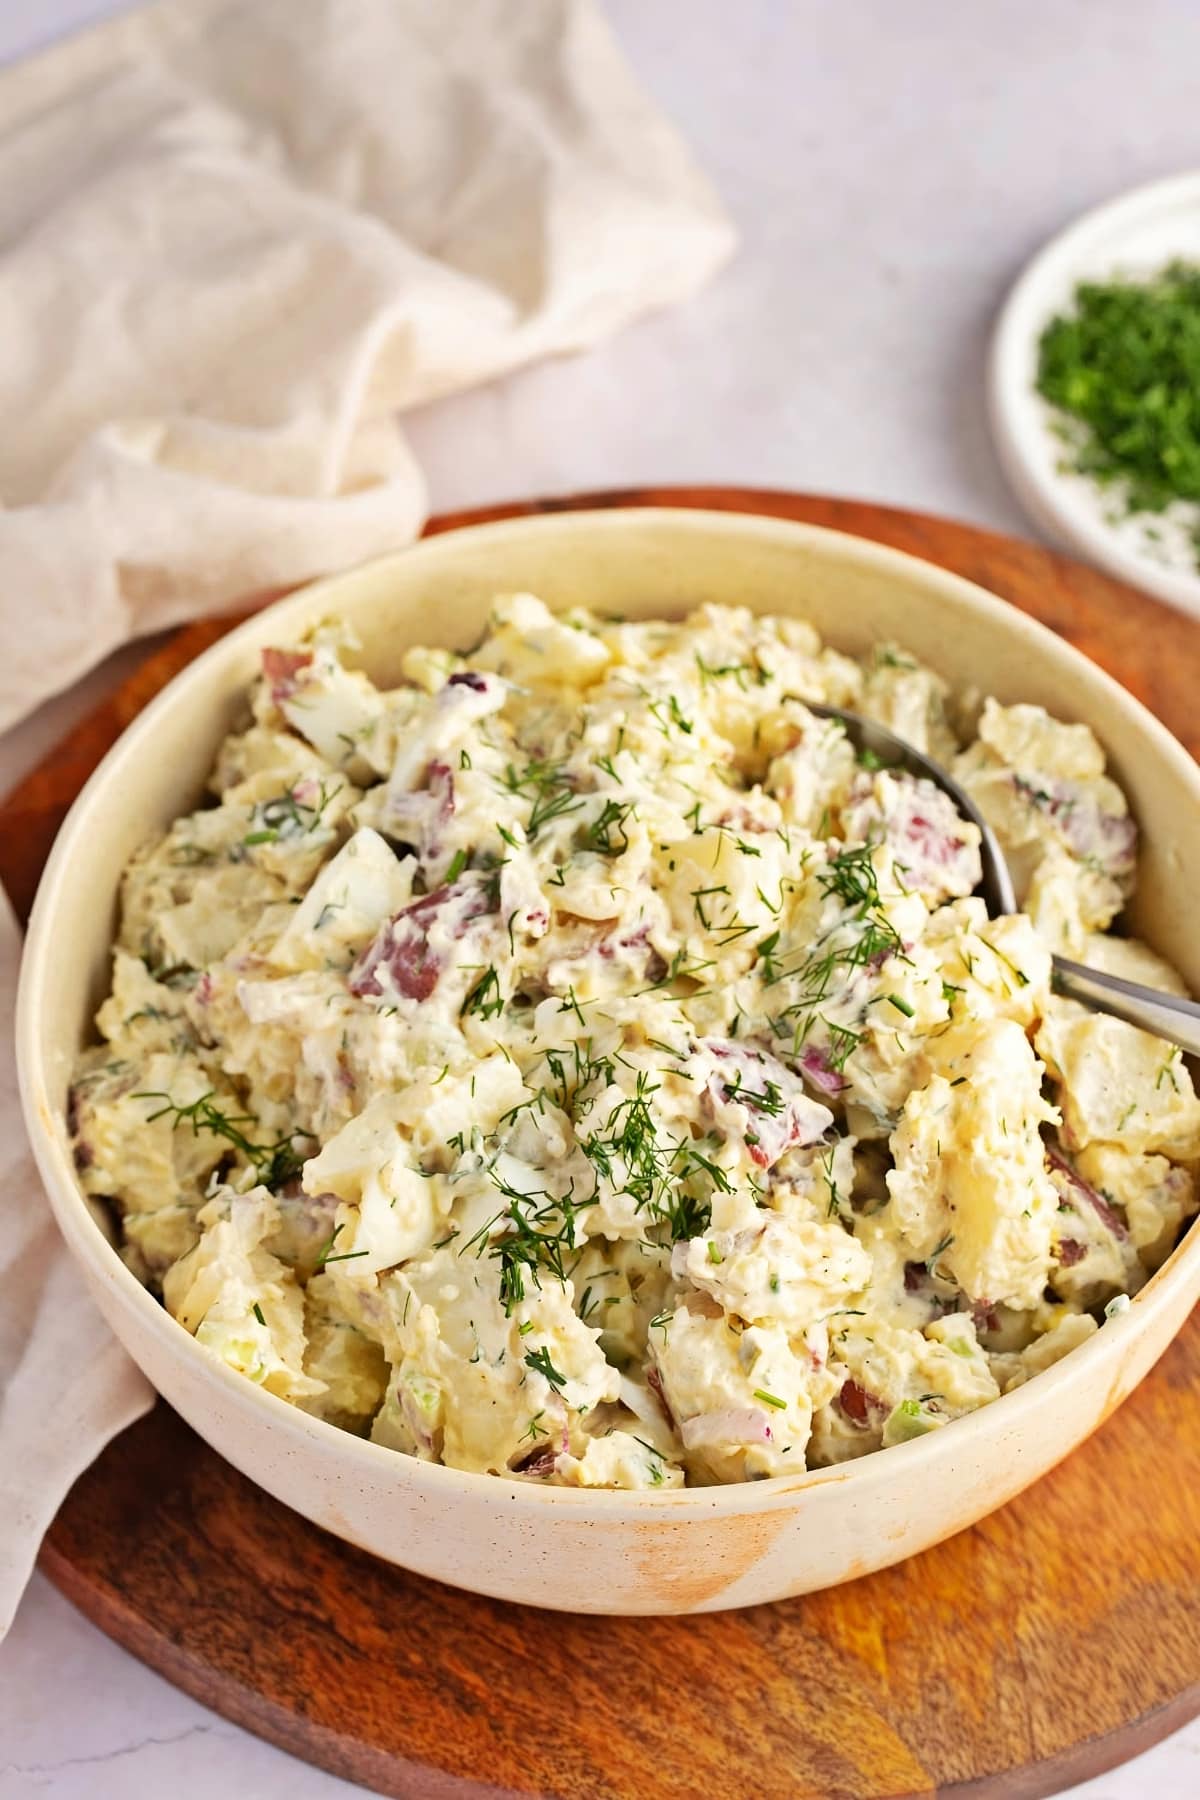 Homemade Creamy Red Potato Salad with Dill, On